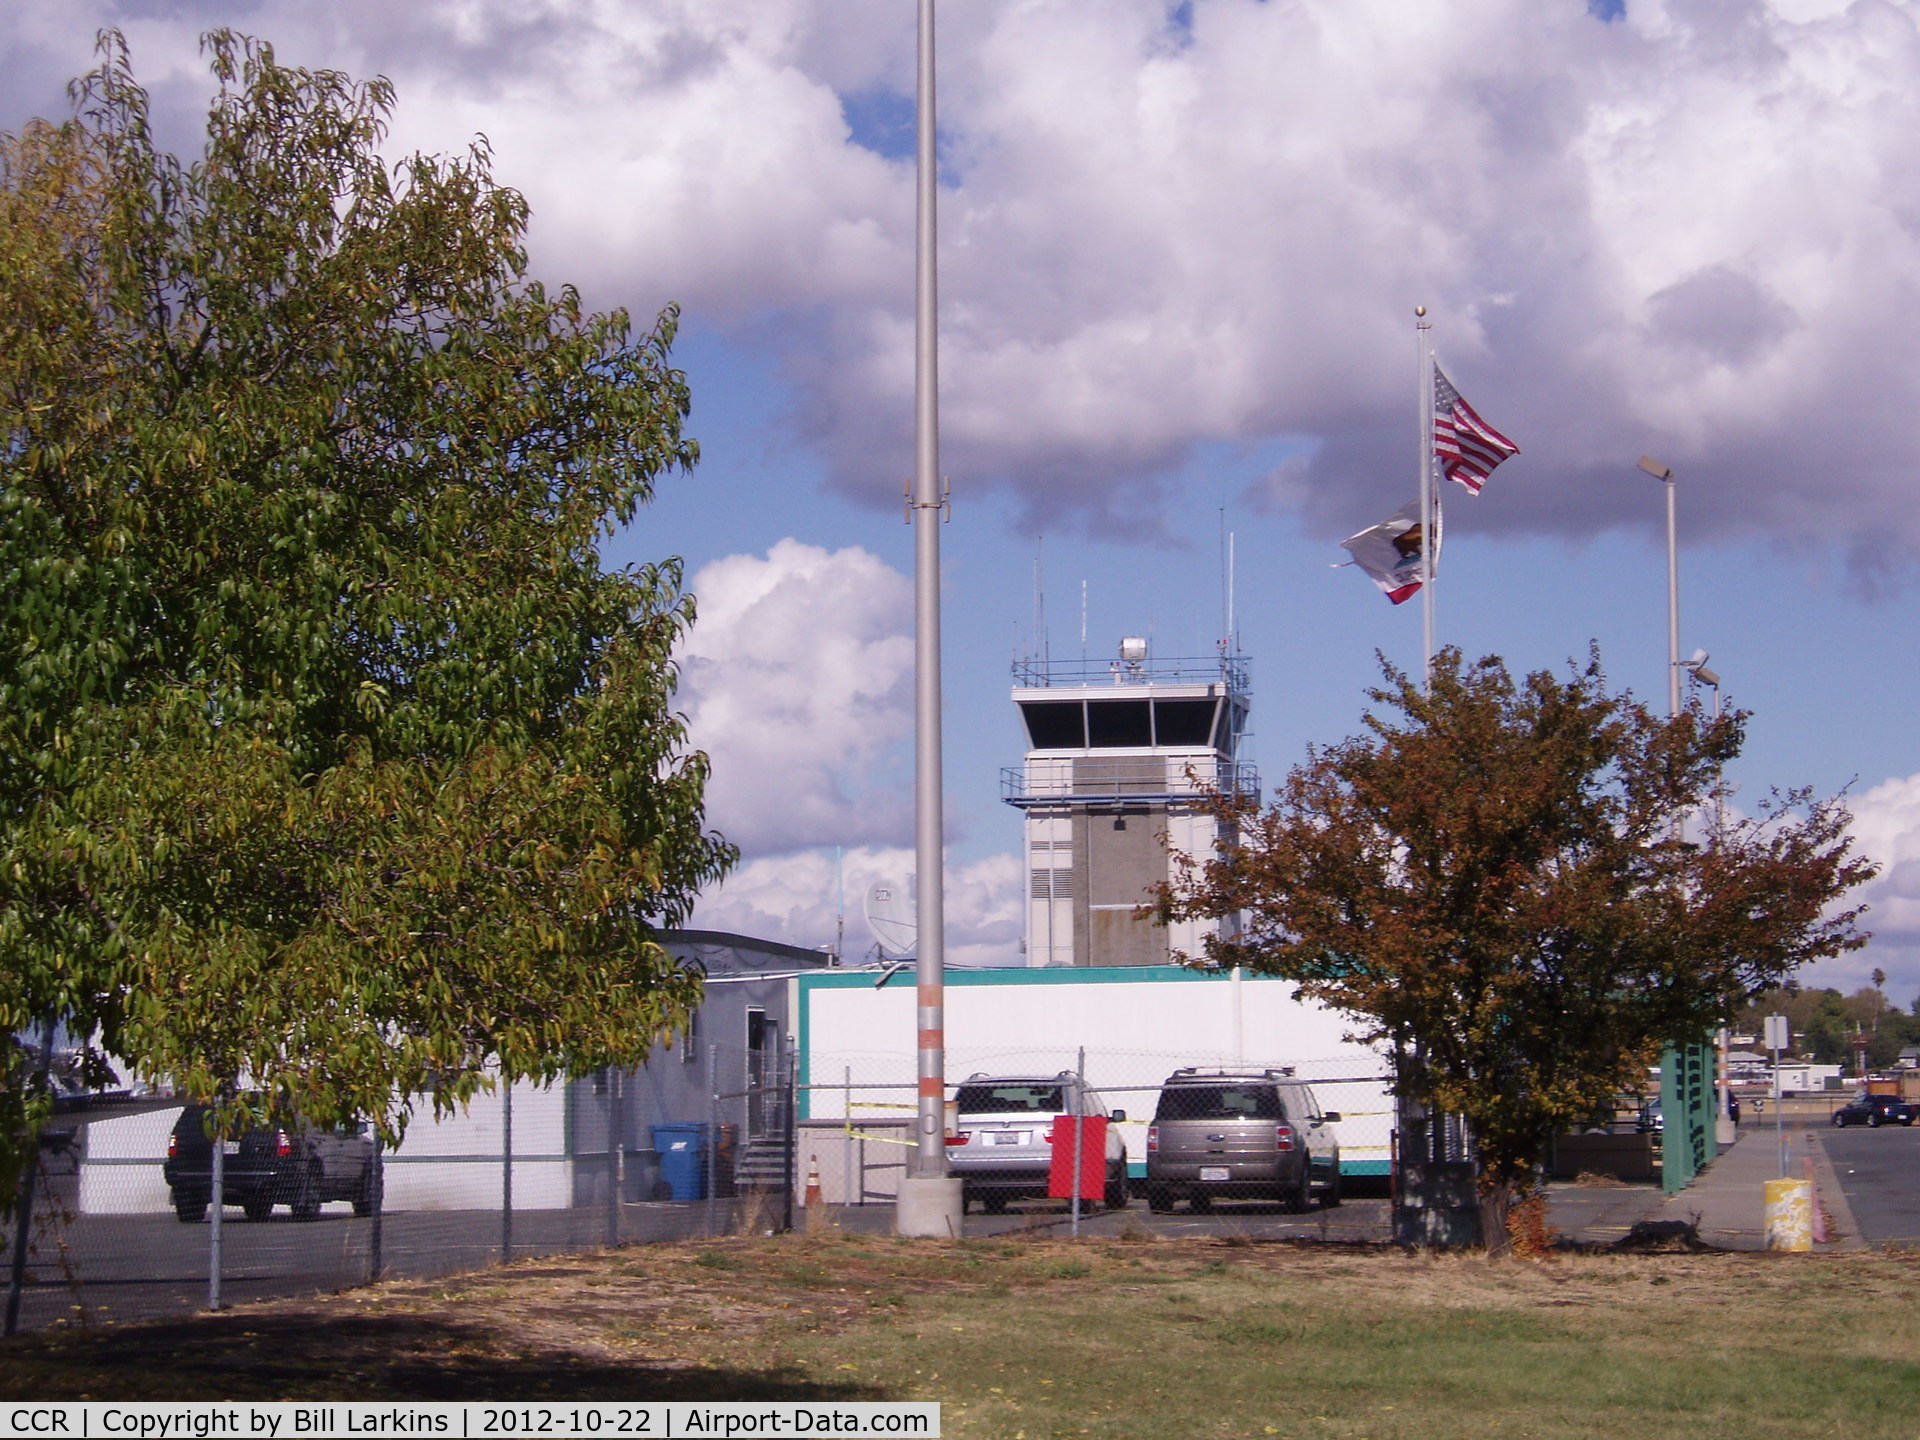 Buchanan Field Airport (CCR) - Tower and CALSTAR offices.